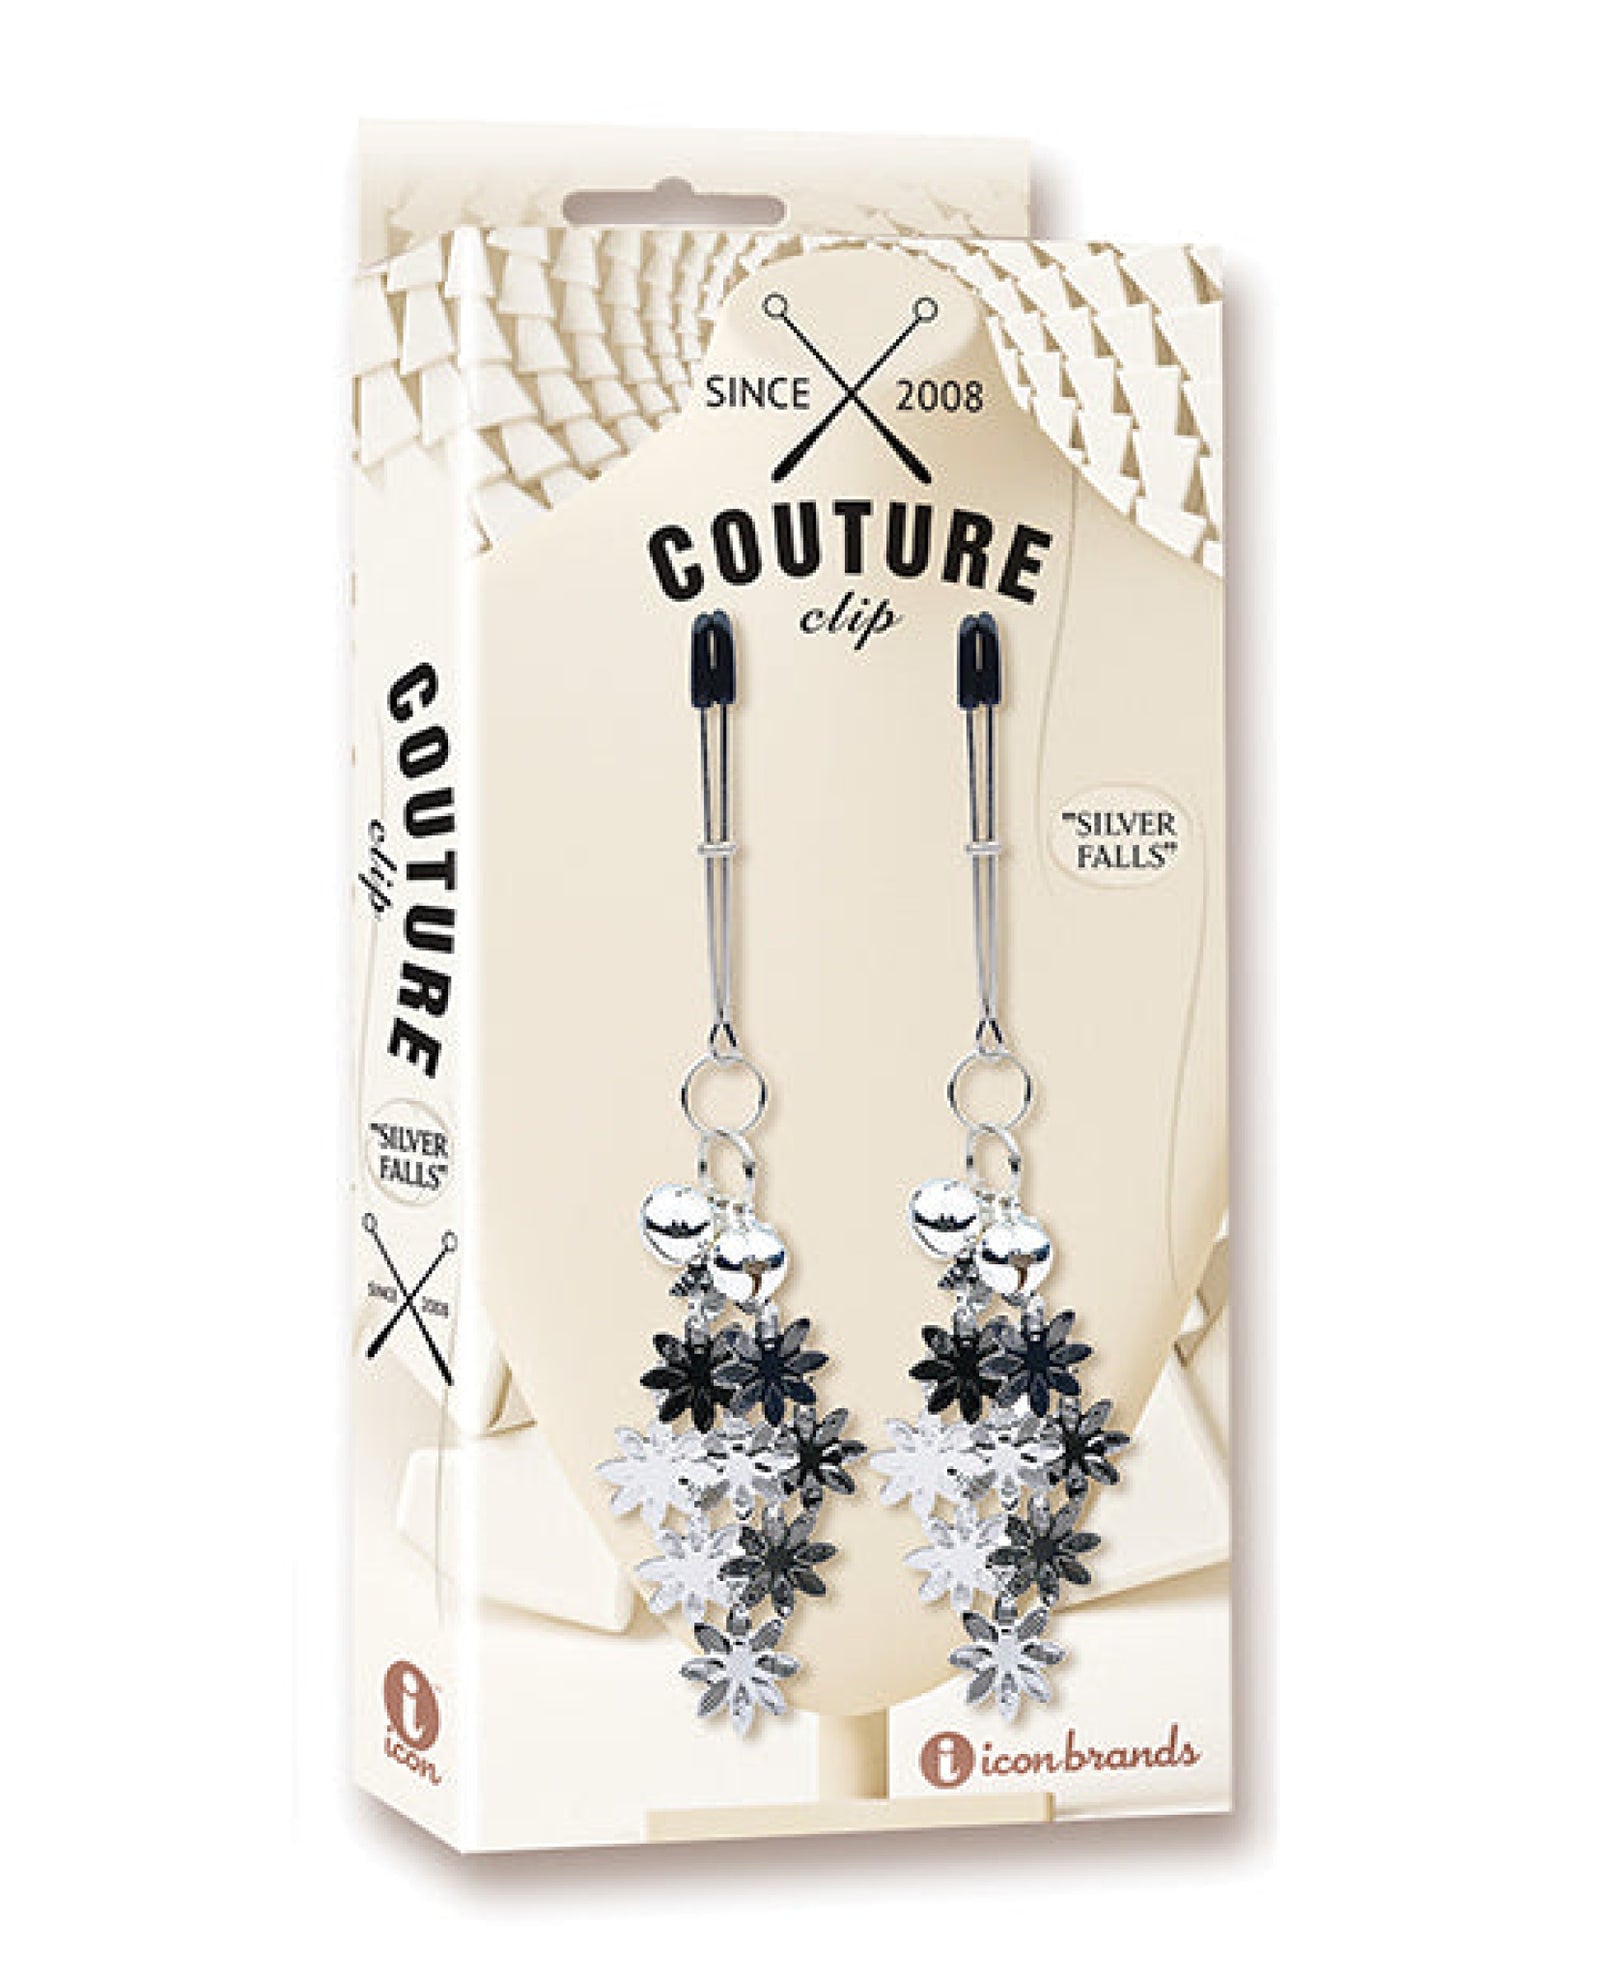 Couture Clips Luxury Nipple Clamps - Silver Falls Icon